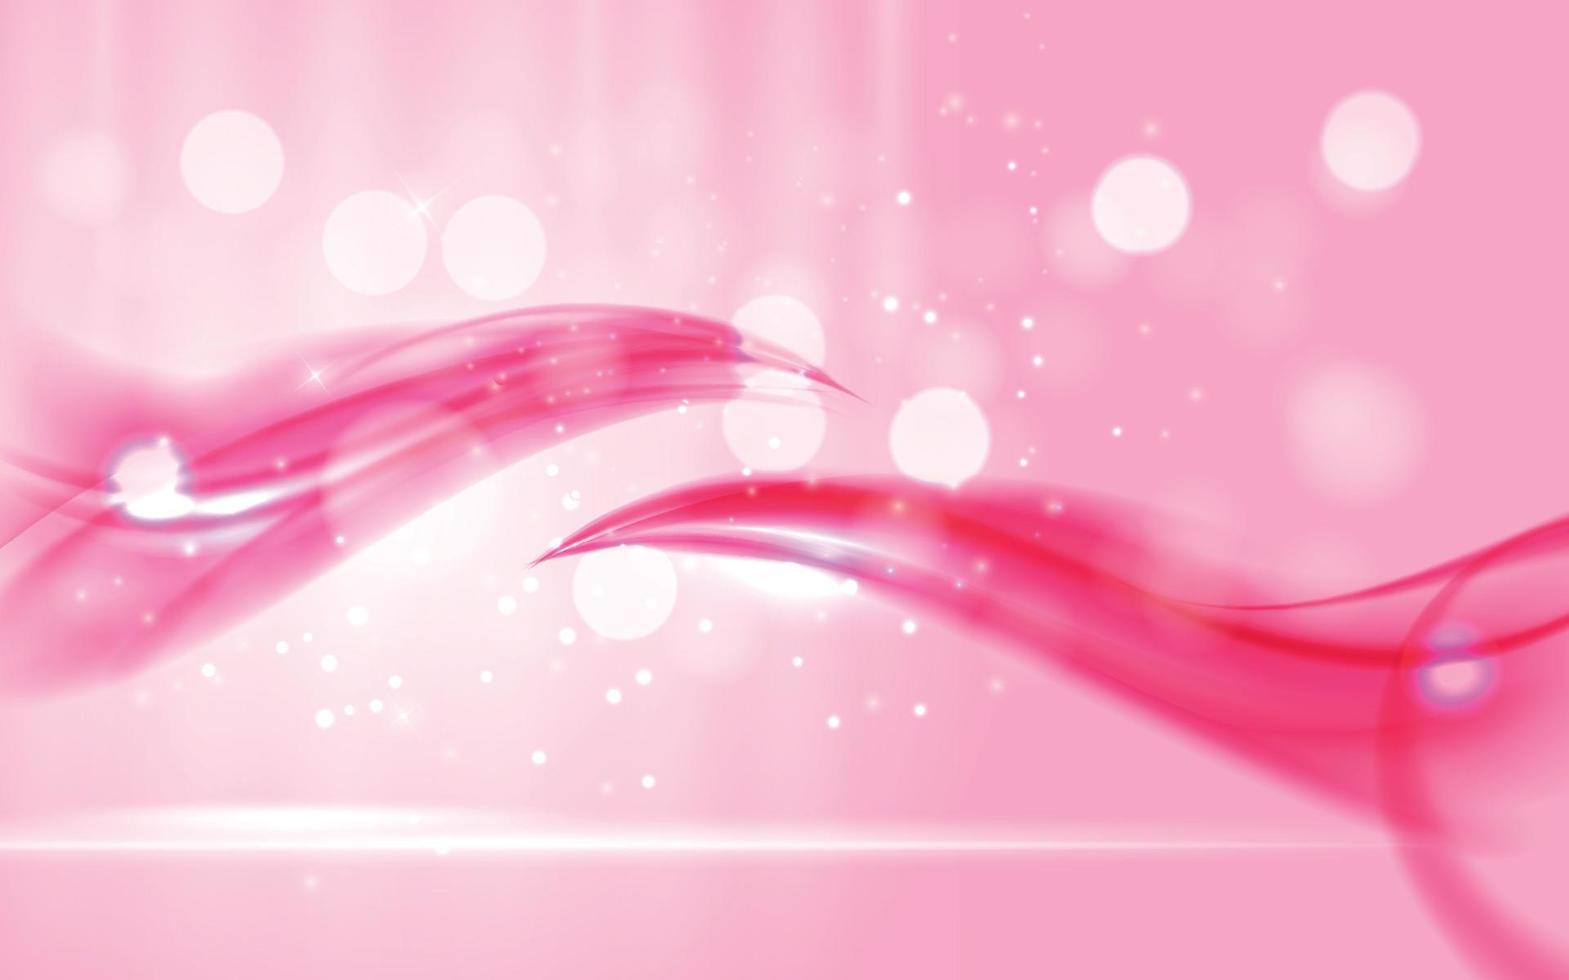 Abstract Pink Wave on Background. Vector Illustration.